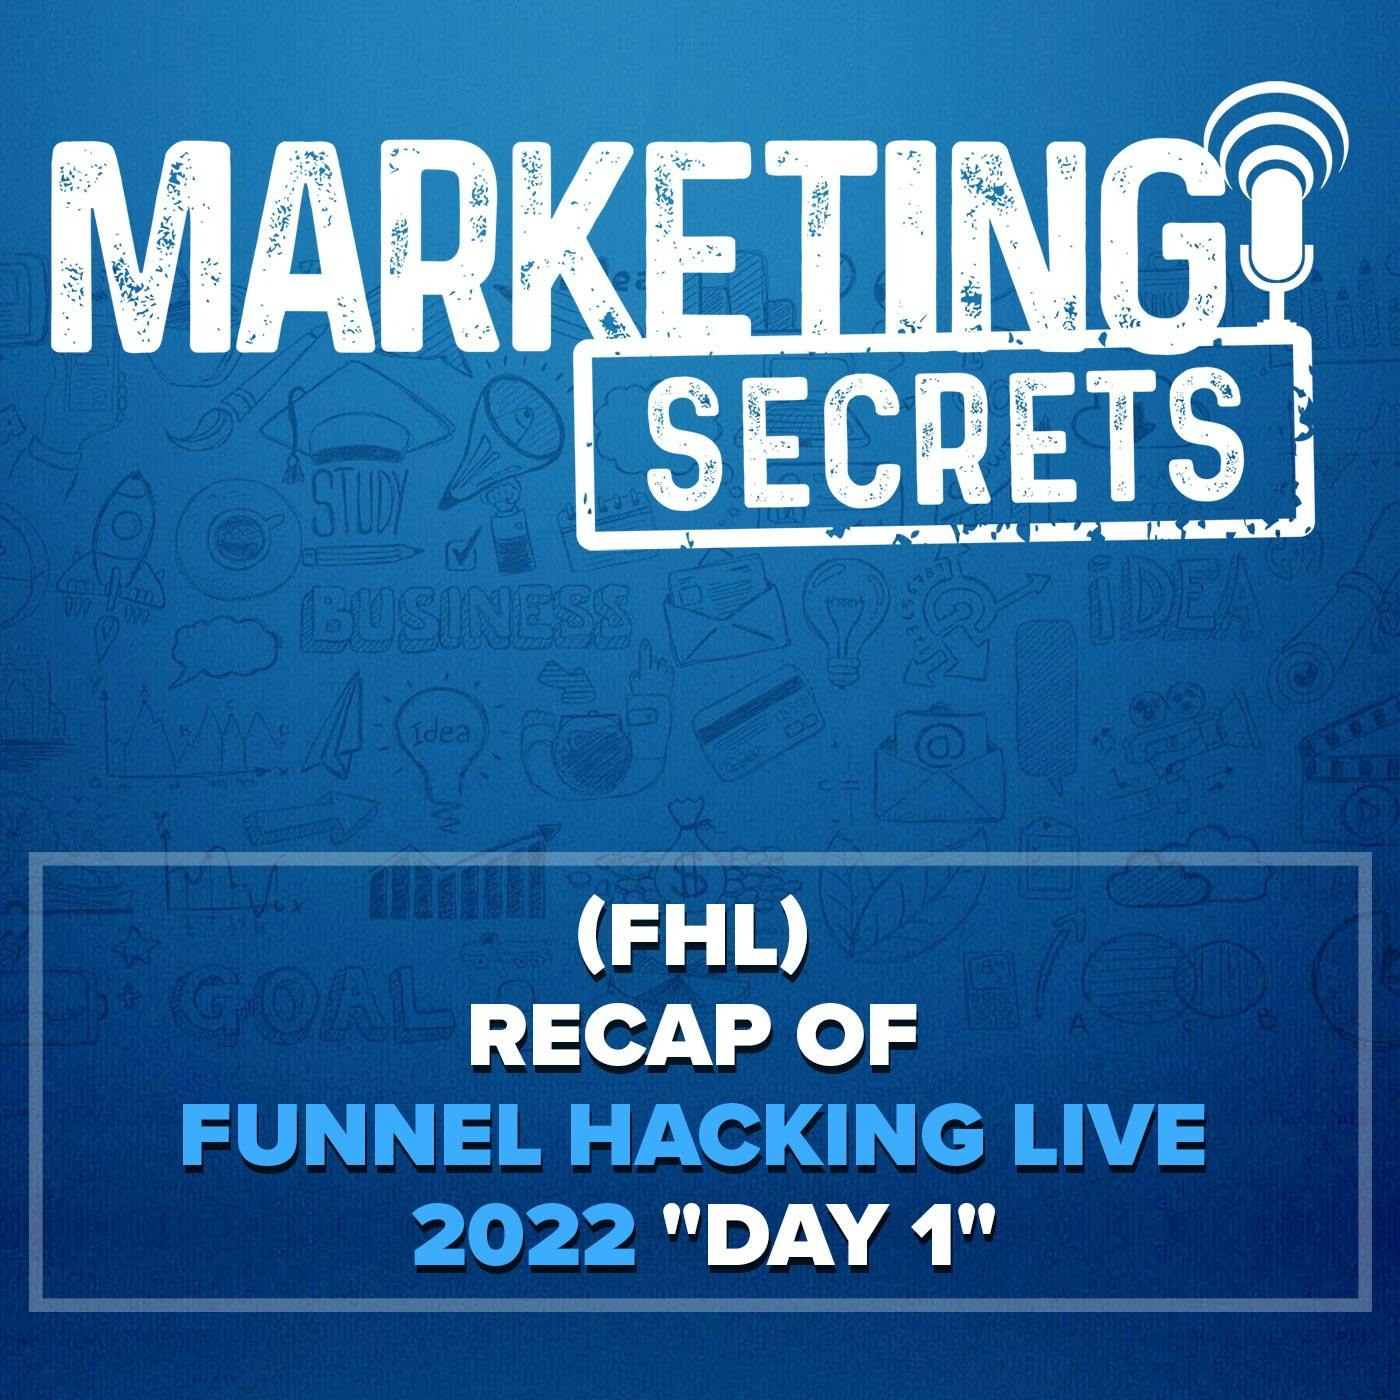 (FHL) Recap of Funnel Hacking Live 2022 ”Day 1”